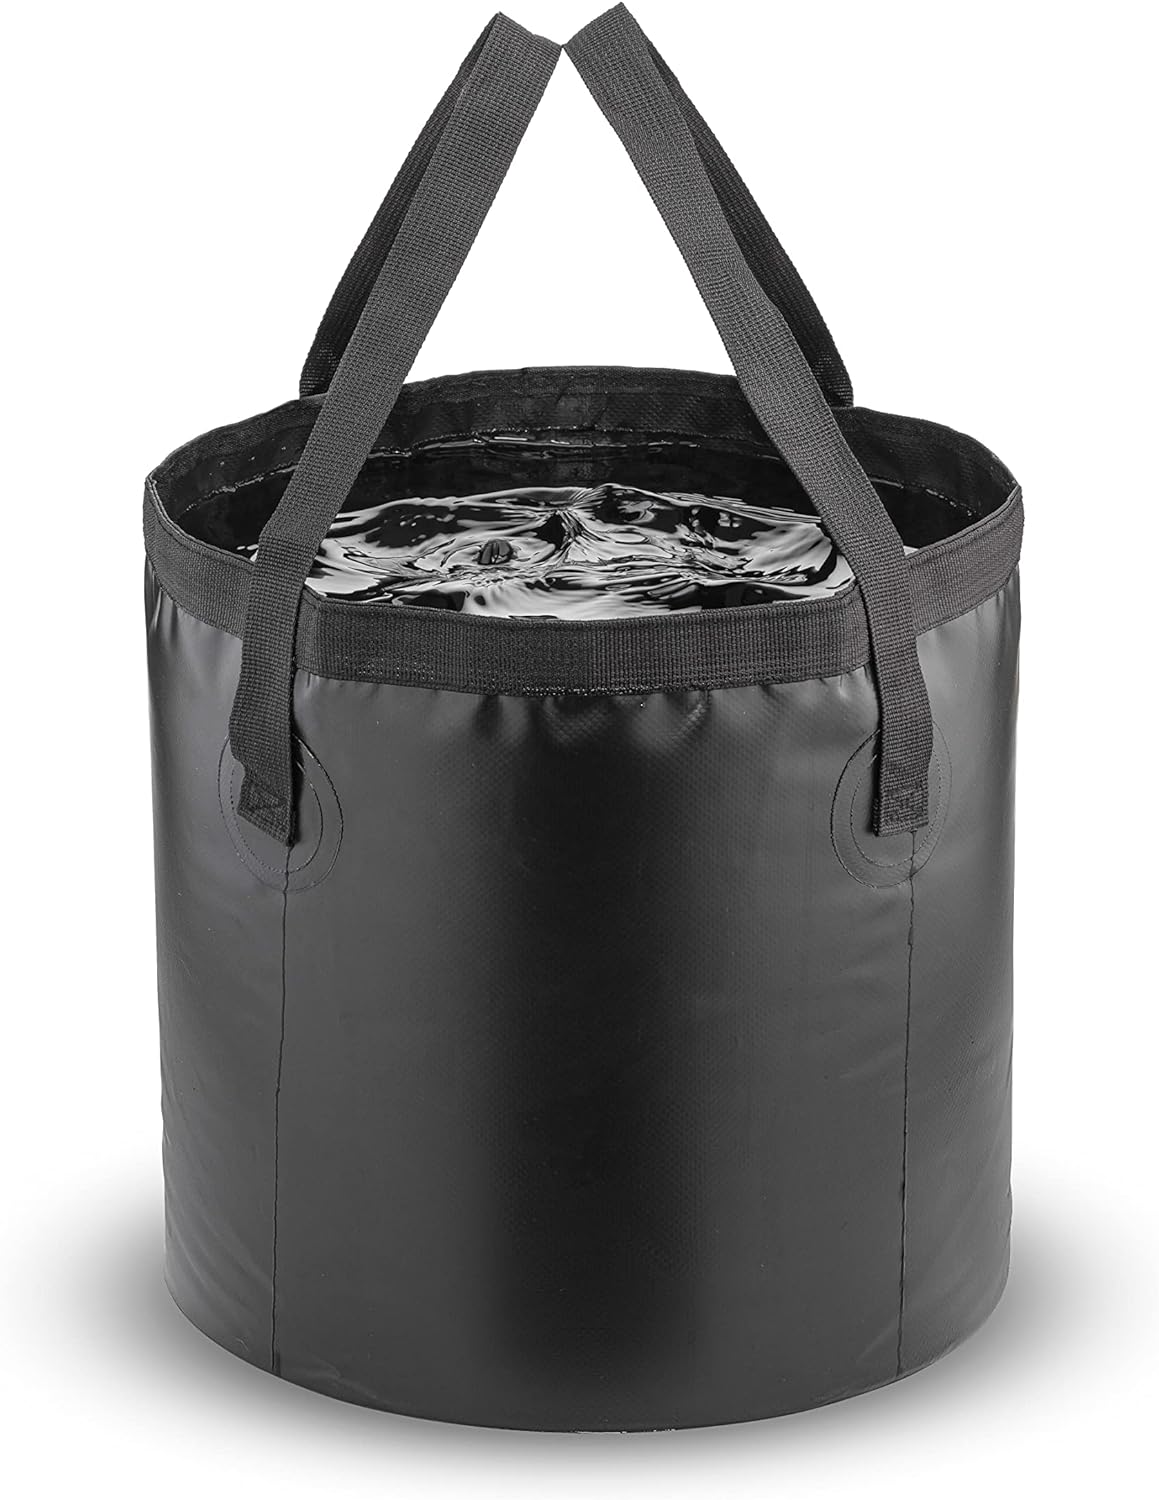 EXTEND-A-REACH Collapsible Foldable Bucket with Handle